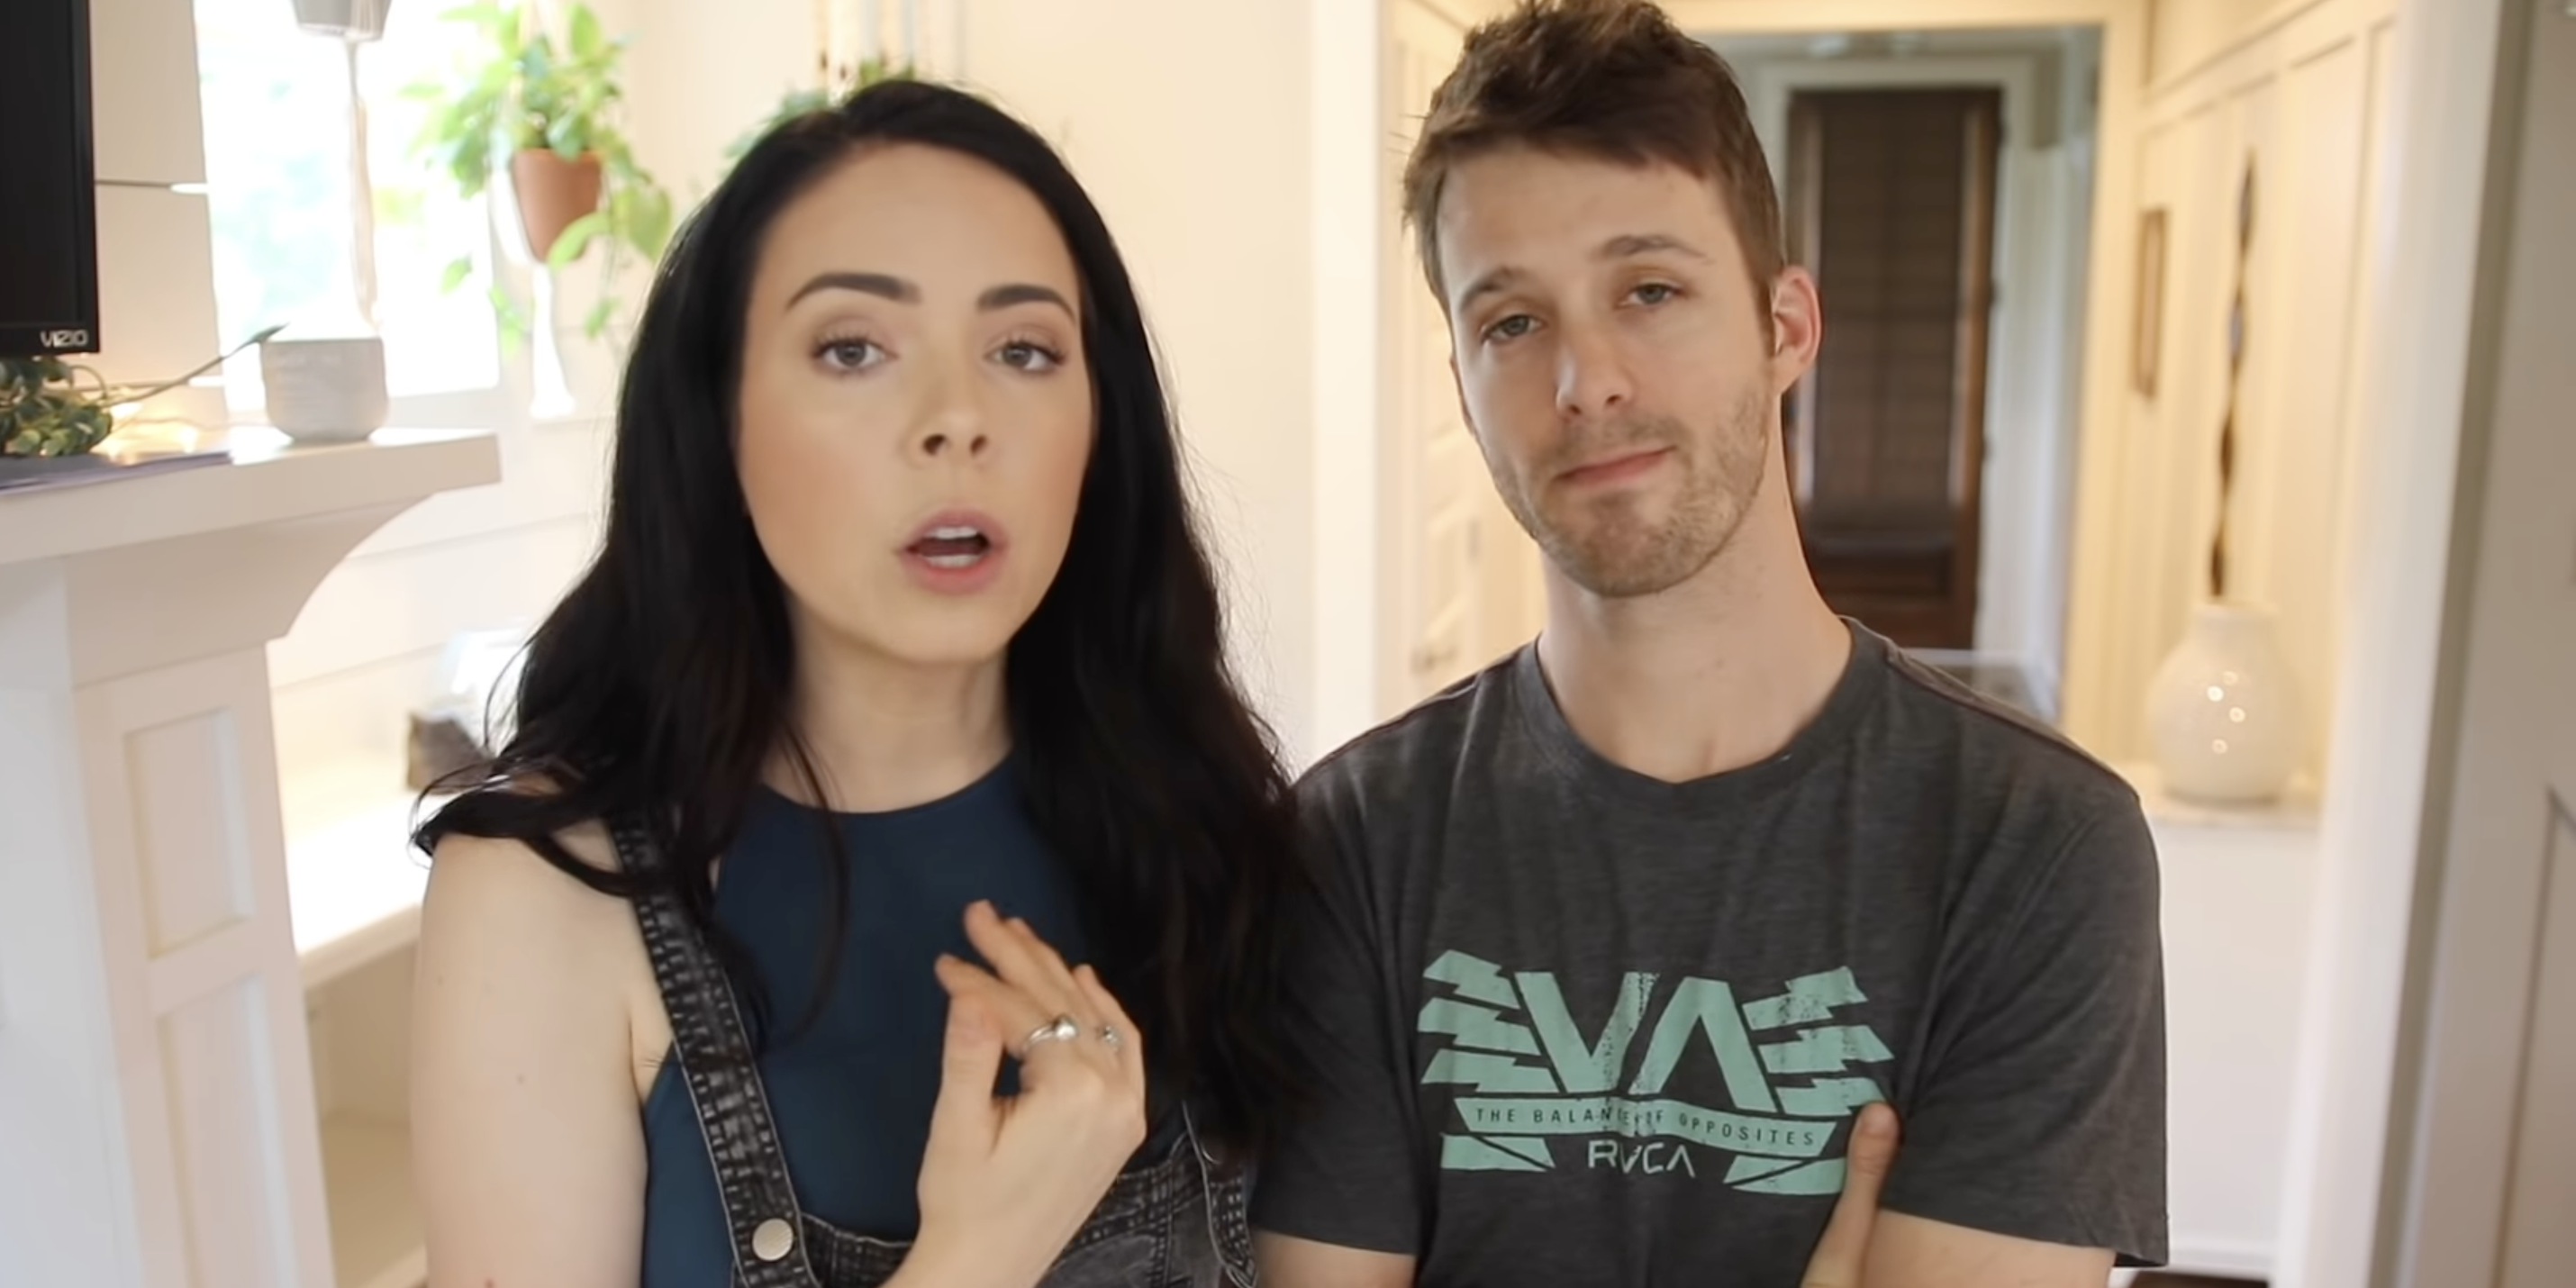 YouTubers Nikki and Dan Phillipi speaking about the adoption in their 2018 video